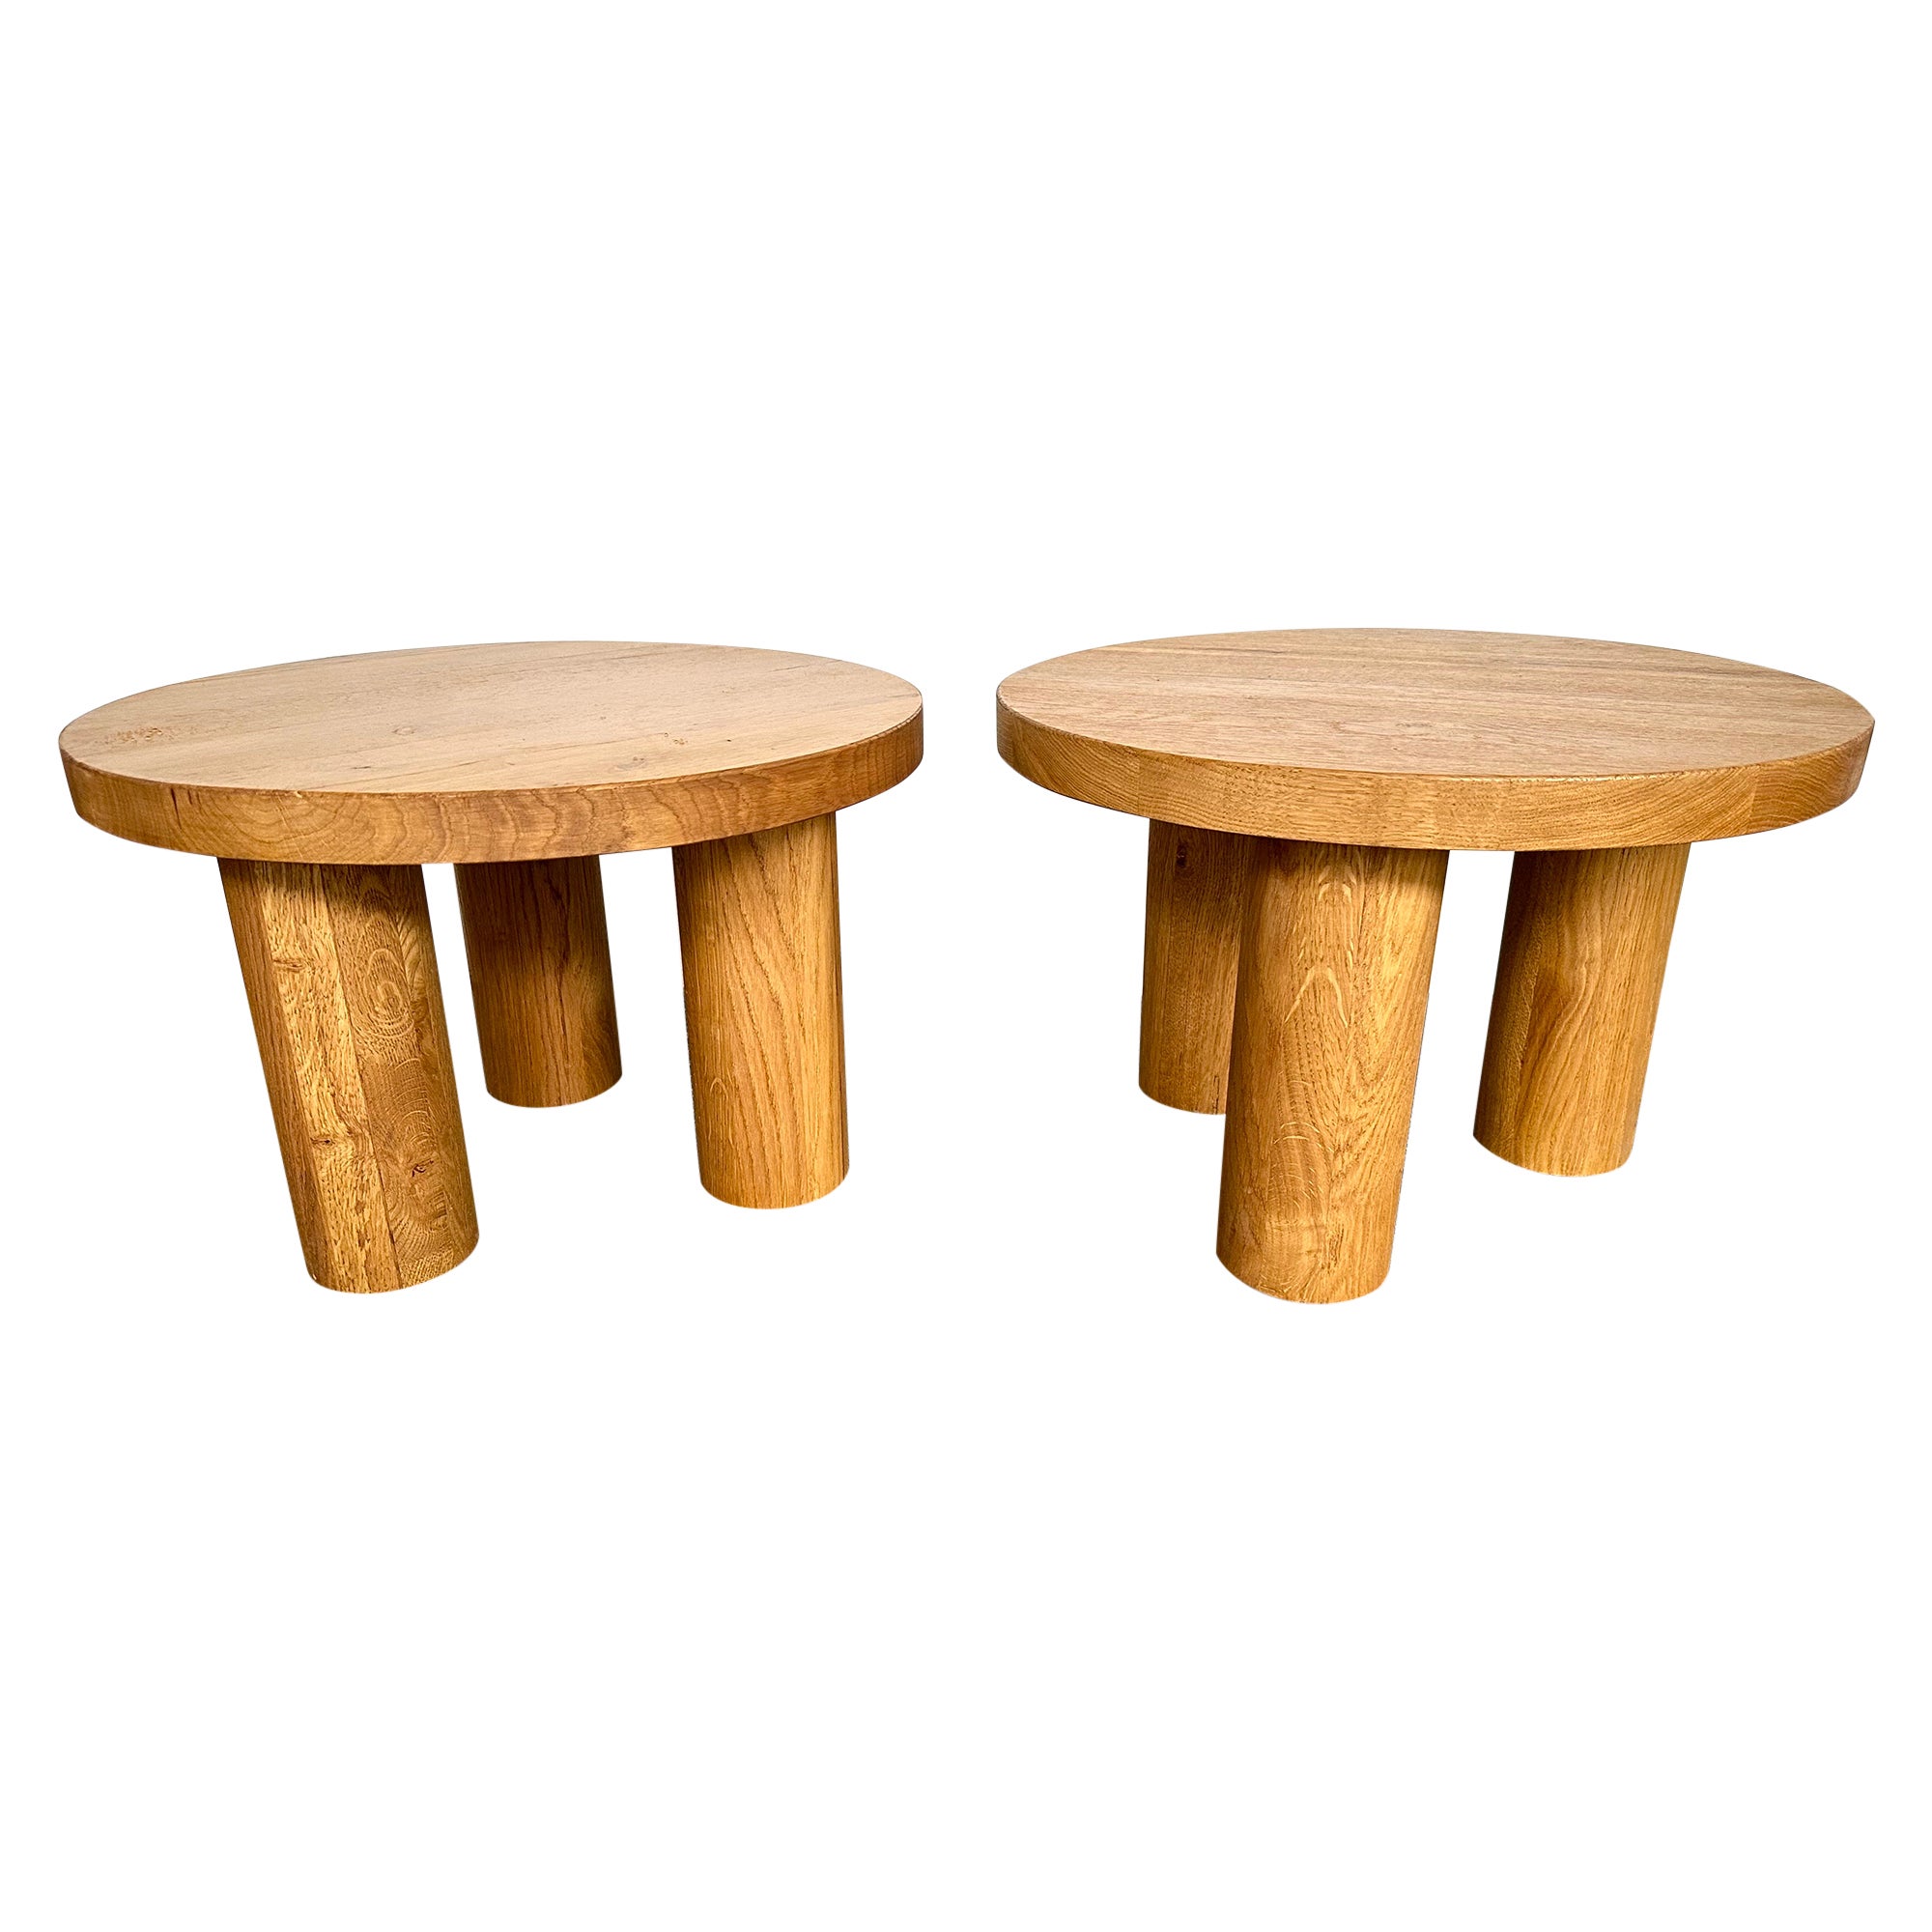 Pair of Massive Elm Wood Side Tables. France, 1960s For Sale